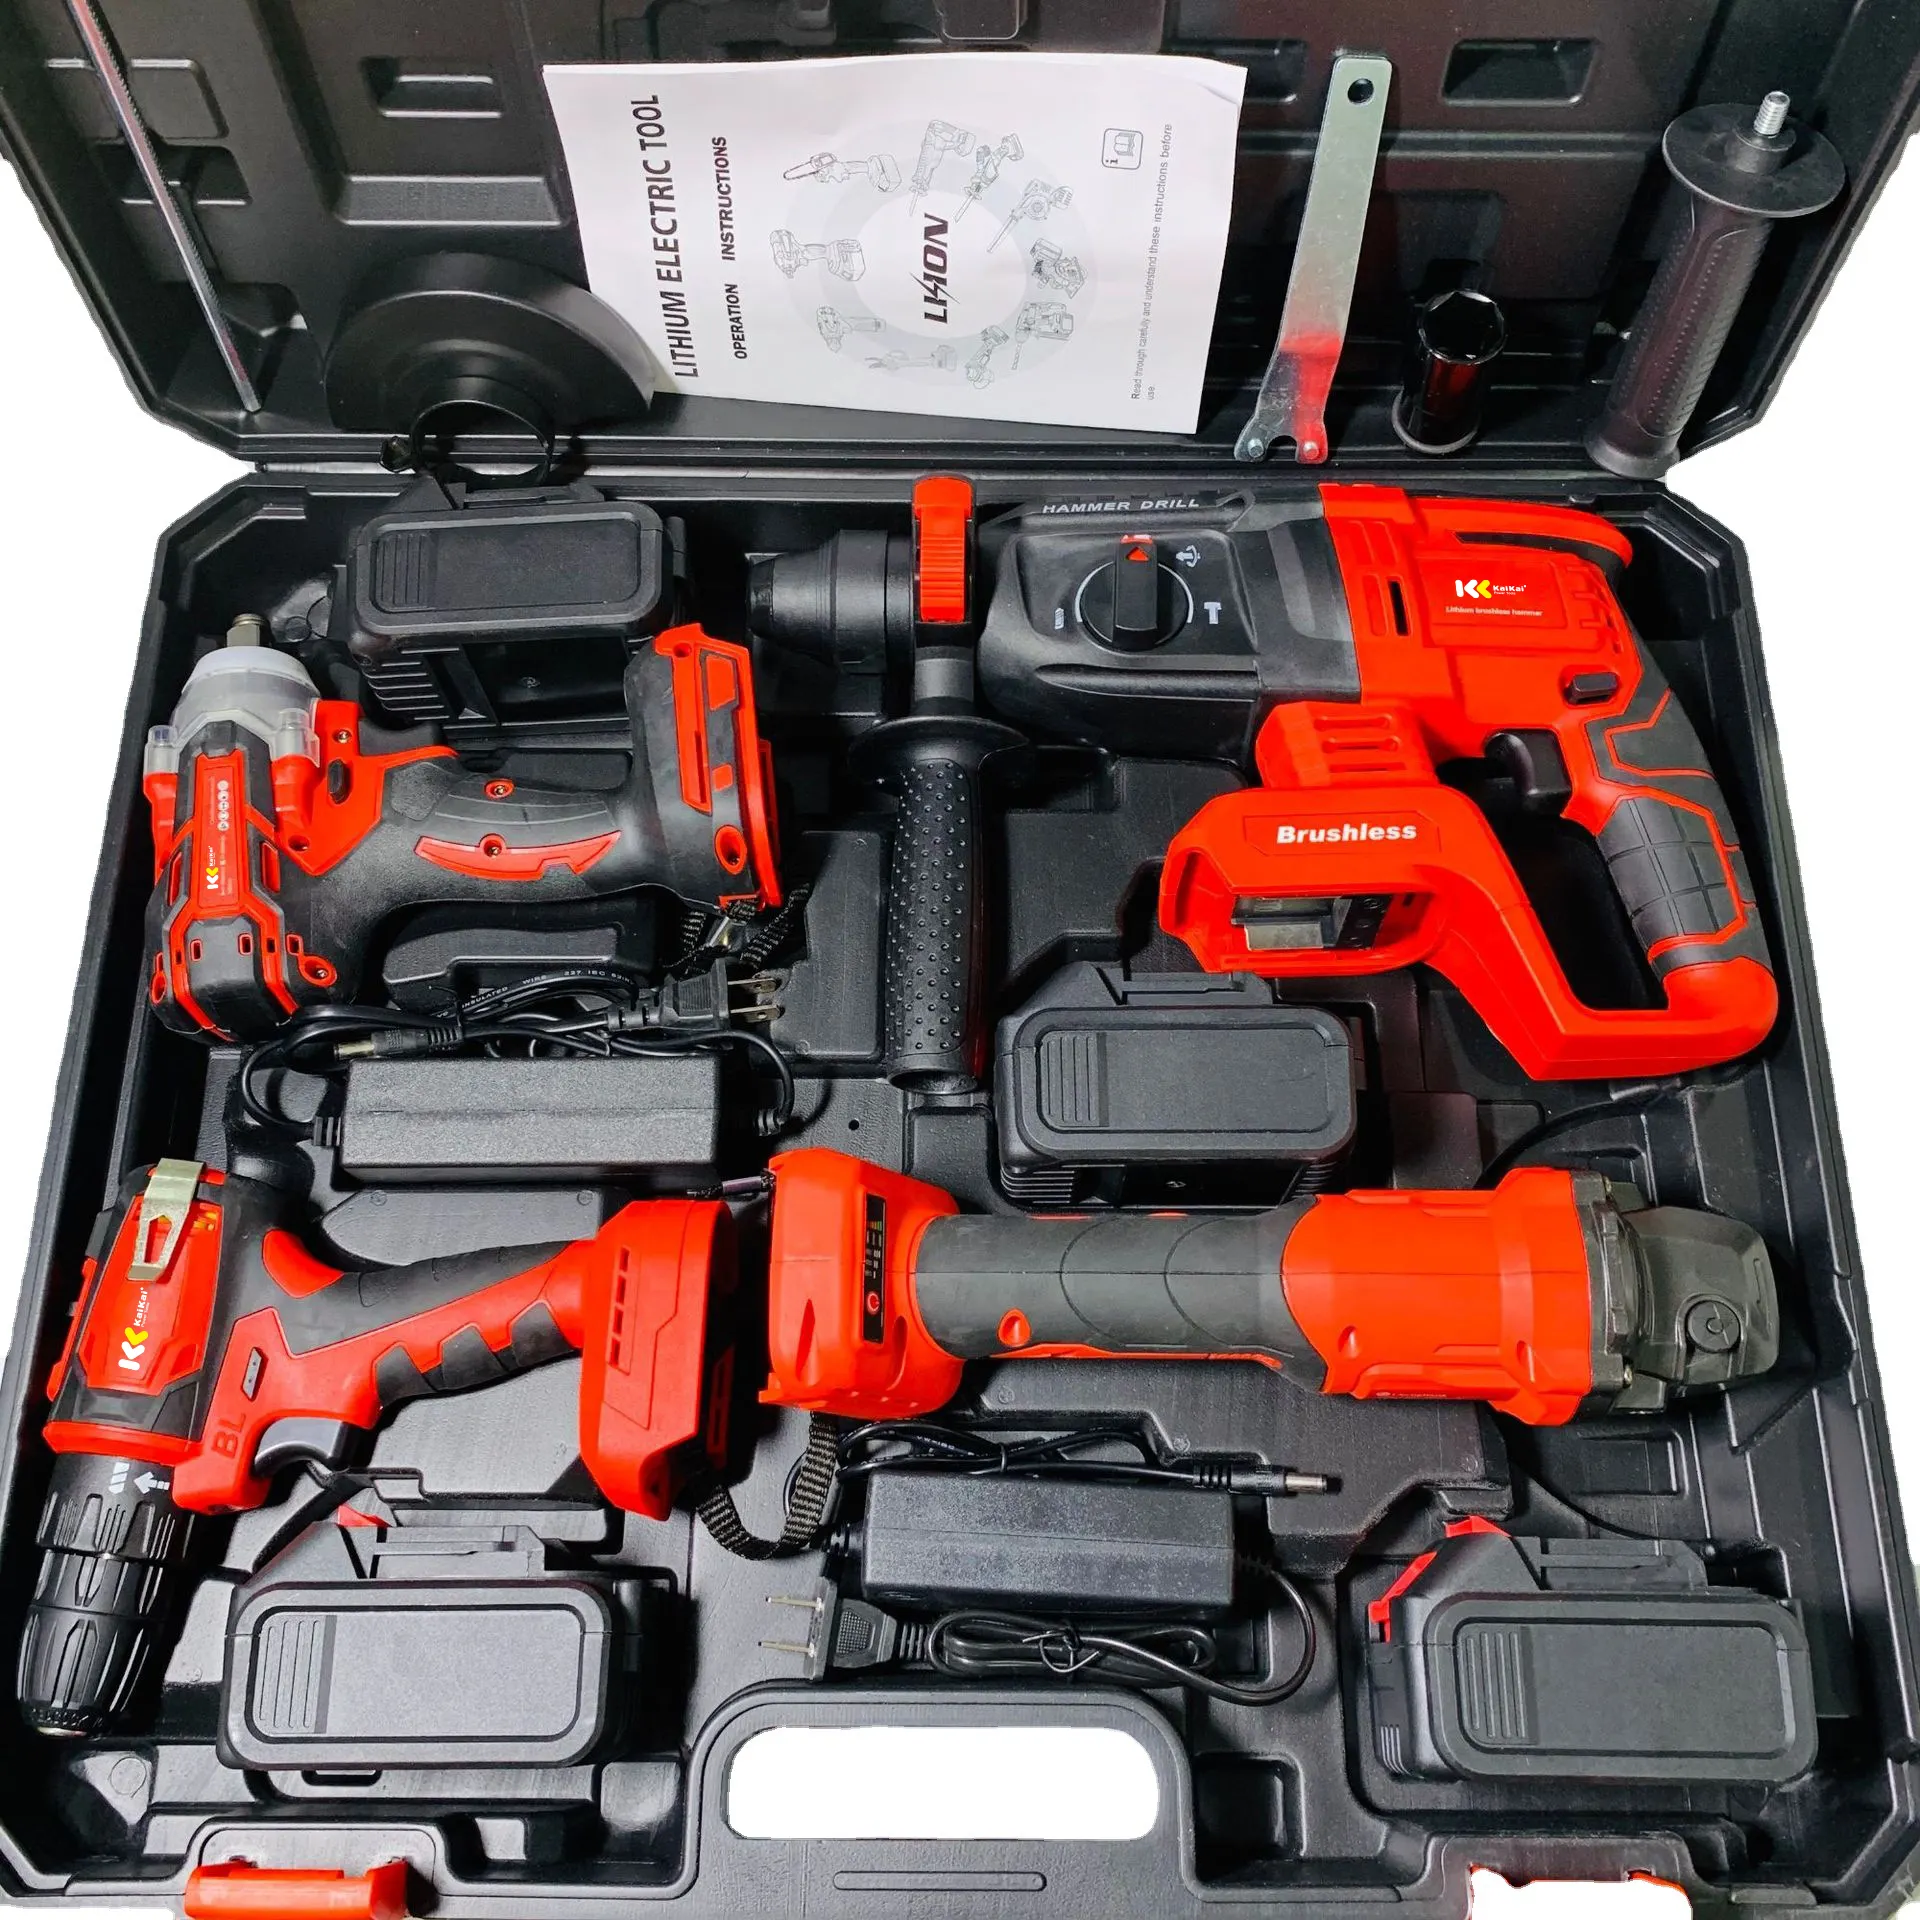 Cordless electric power drills hand held portable screwdriver cordless drill machine power tools tool sets red